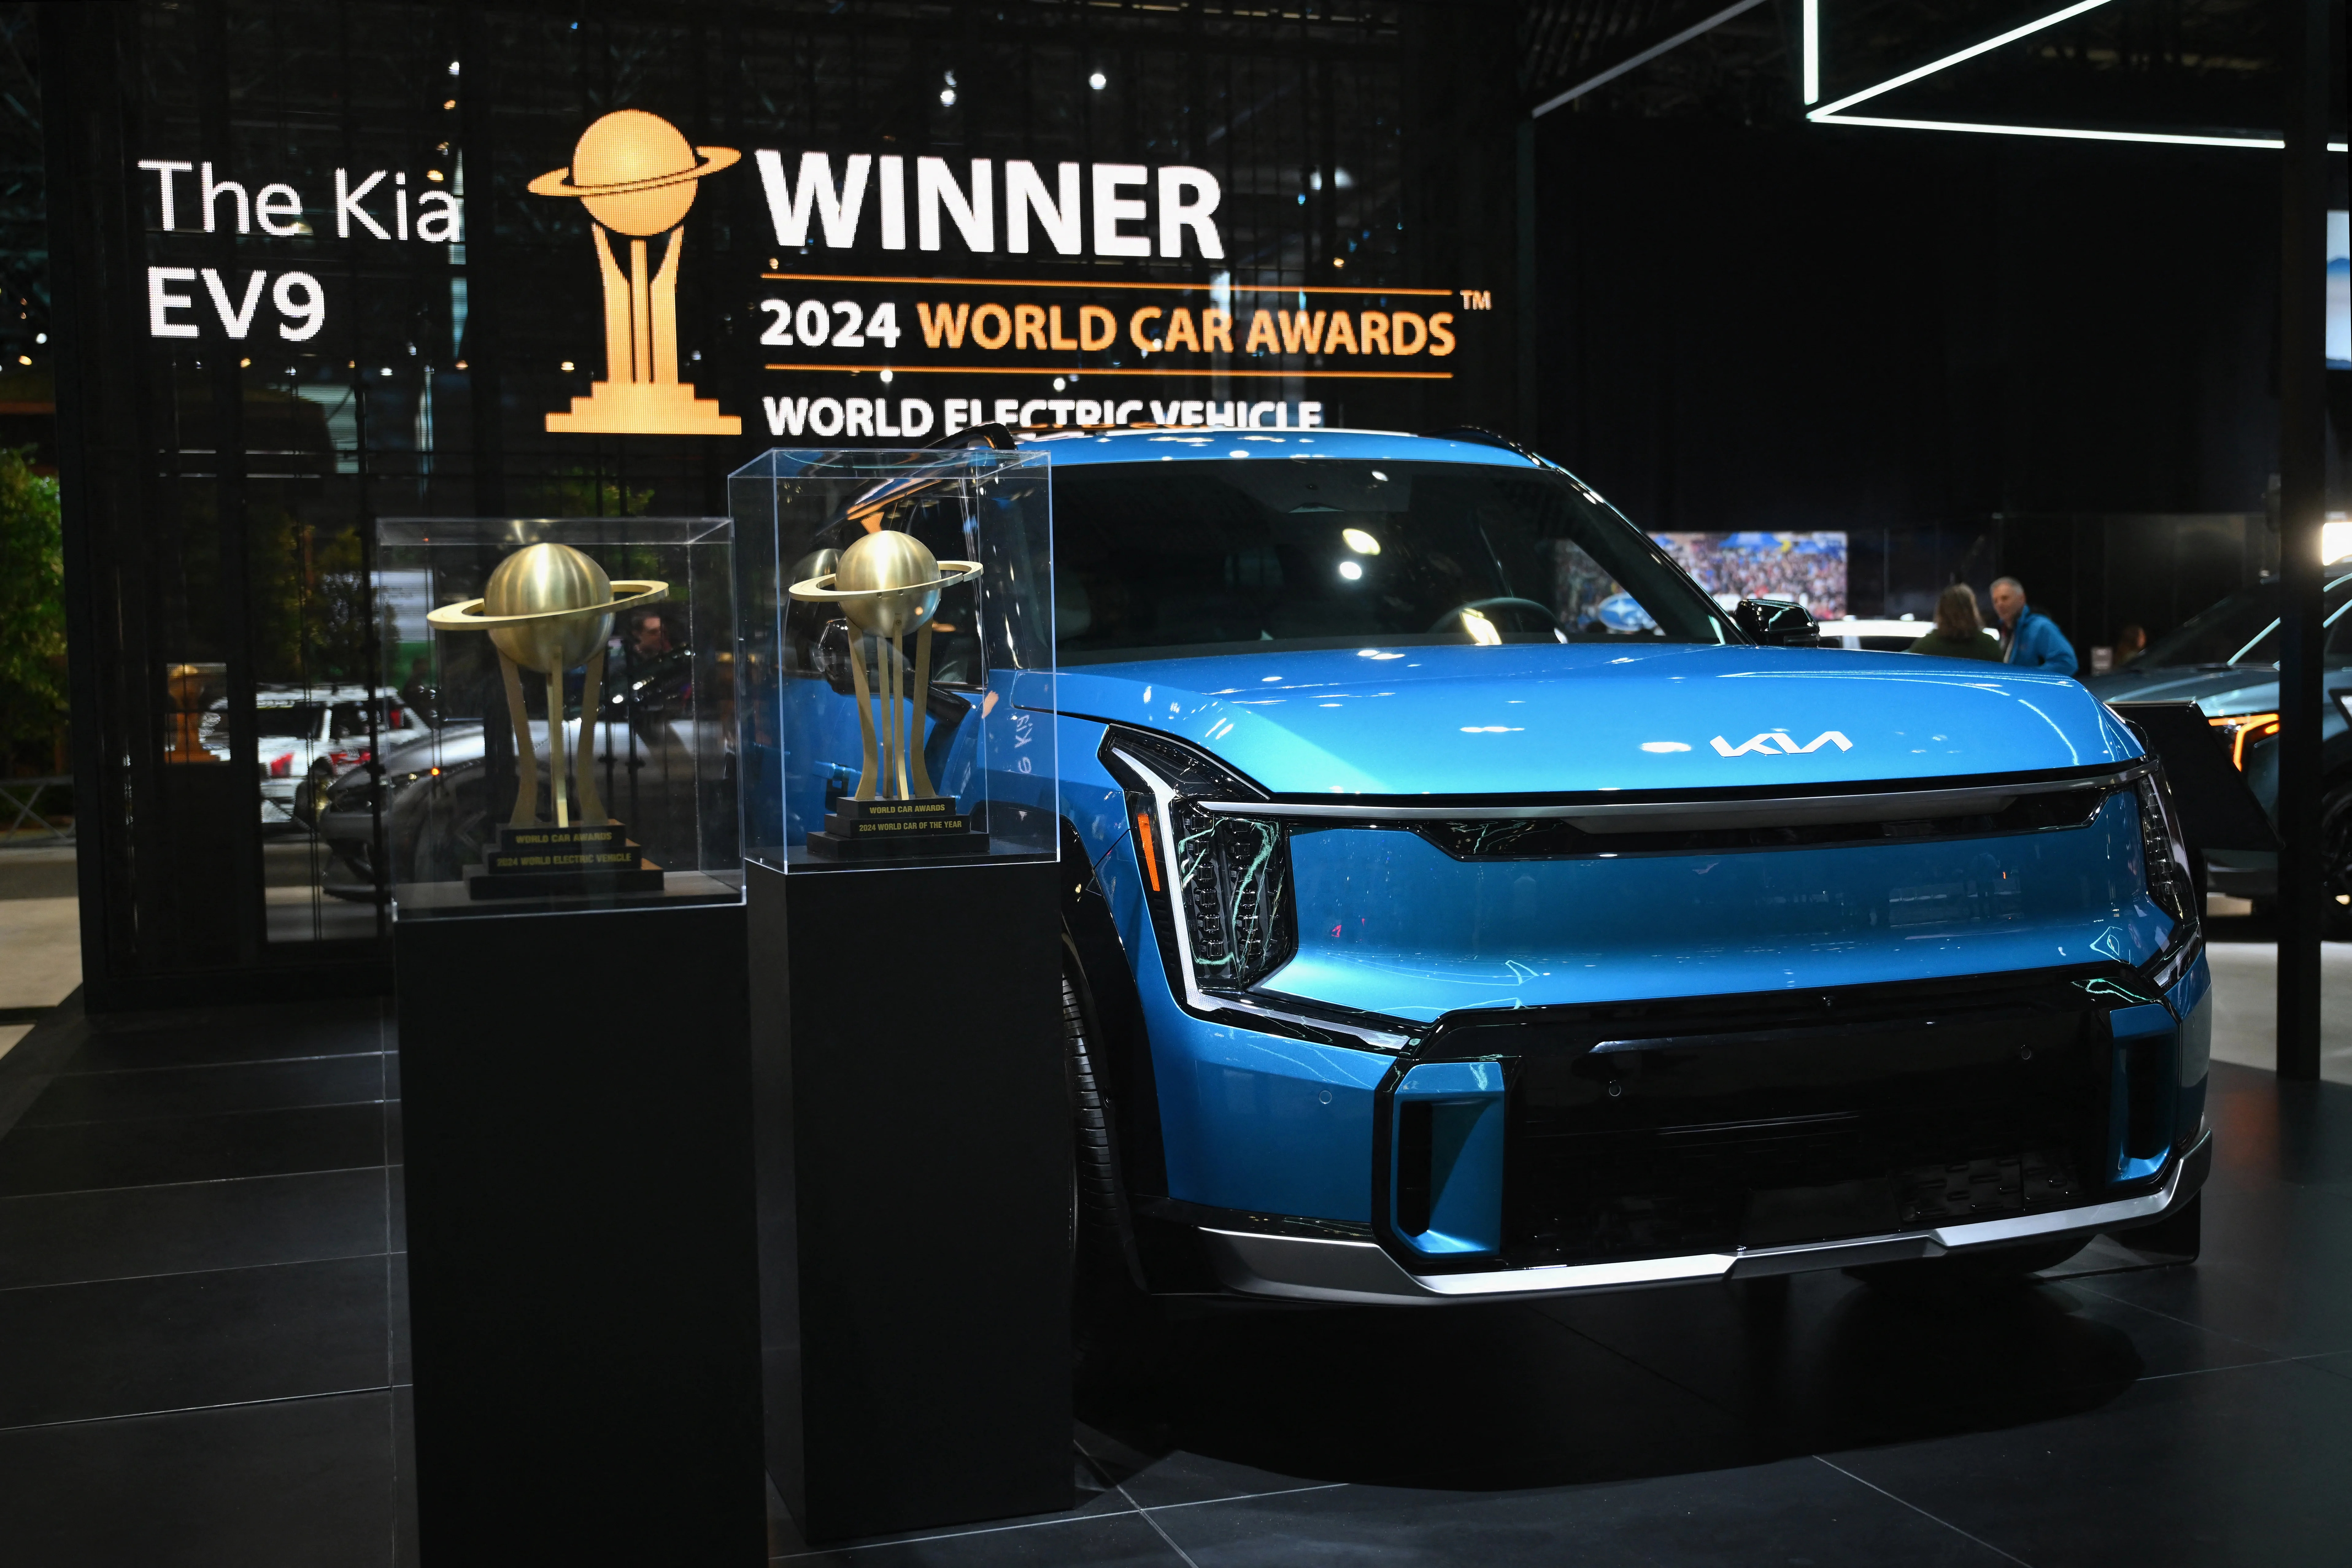 Winner of the 2024 World Car of the Year award, the Kia EV9, is displayed during the New York International Auto Show at the Jacob Javits Convention Center in New York City on March 27, 2024. (Photo by ANGELA WEISS / AFP) (Photo by ANGELA WEISS/AFP via Getty Images)